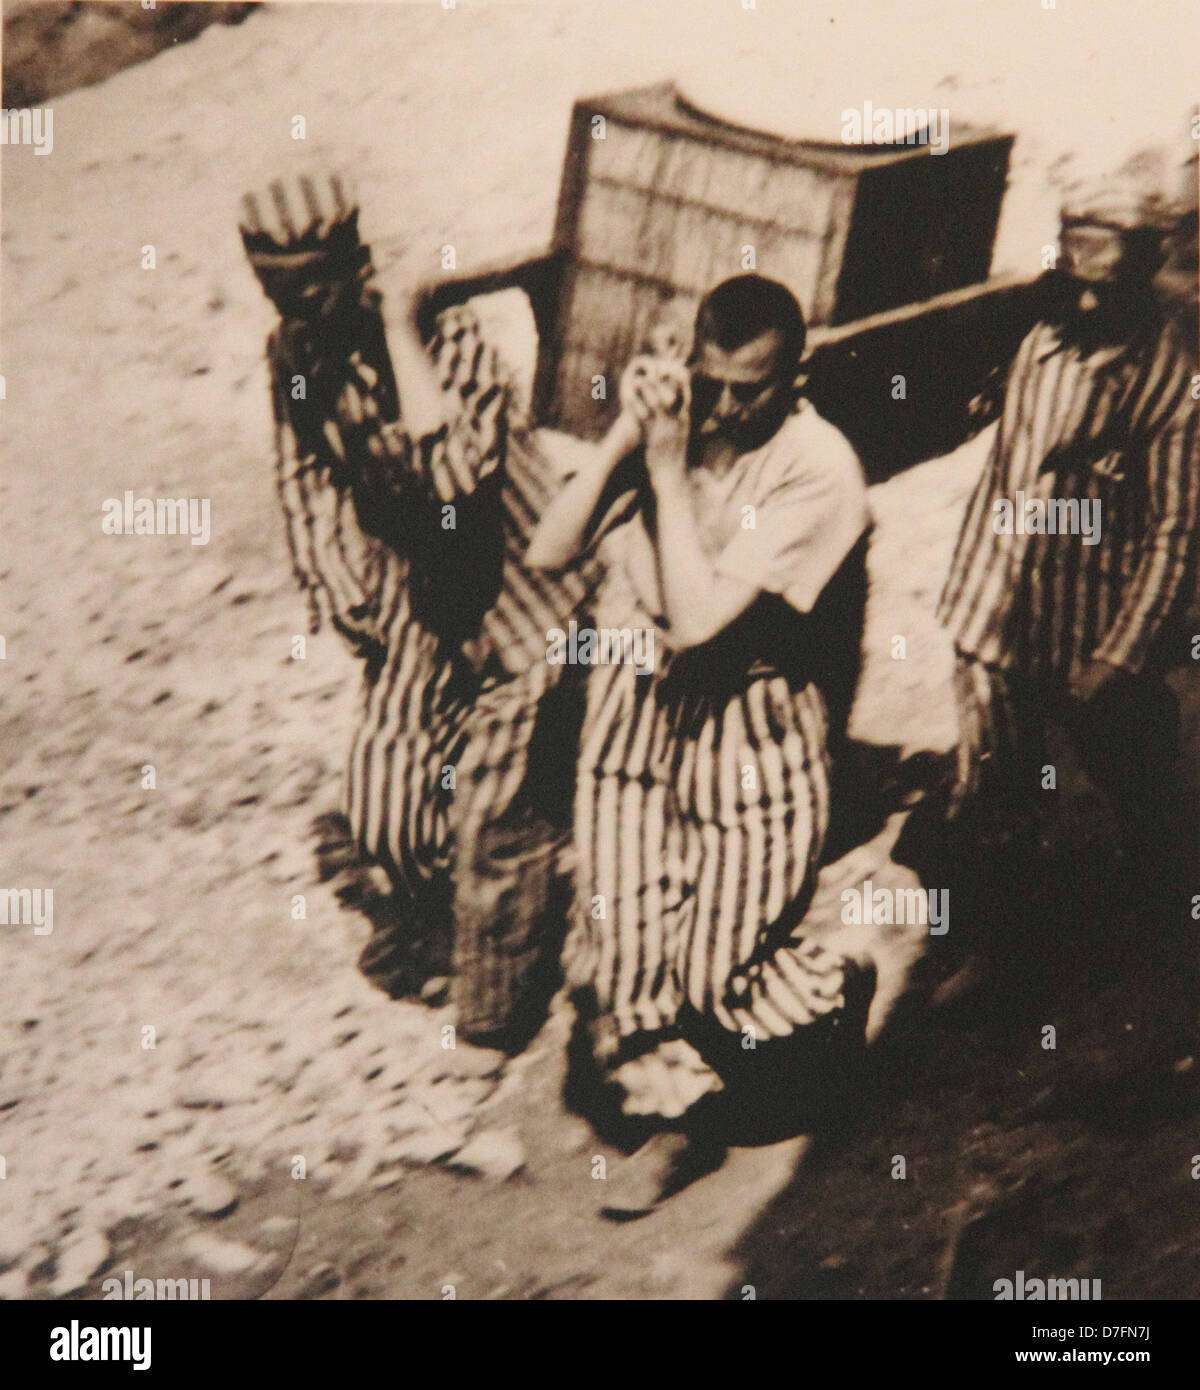 Polish Jews doing slave labor in Concentration Camp Stock Photo